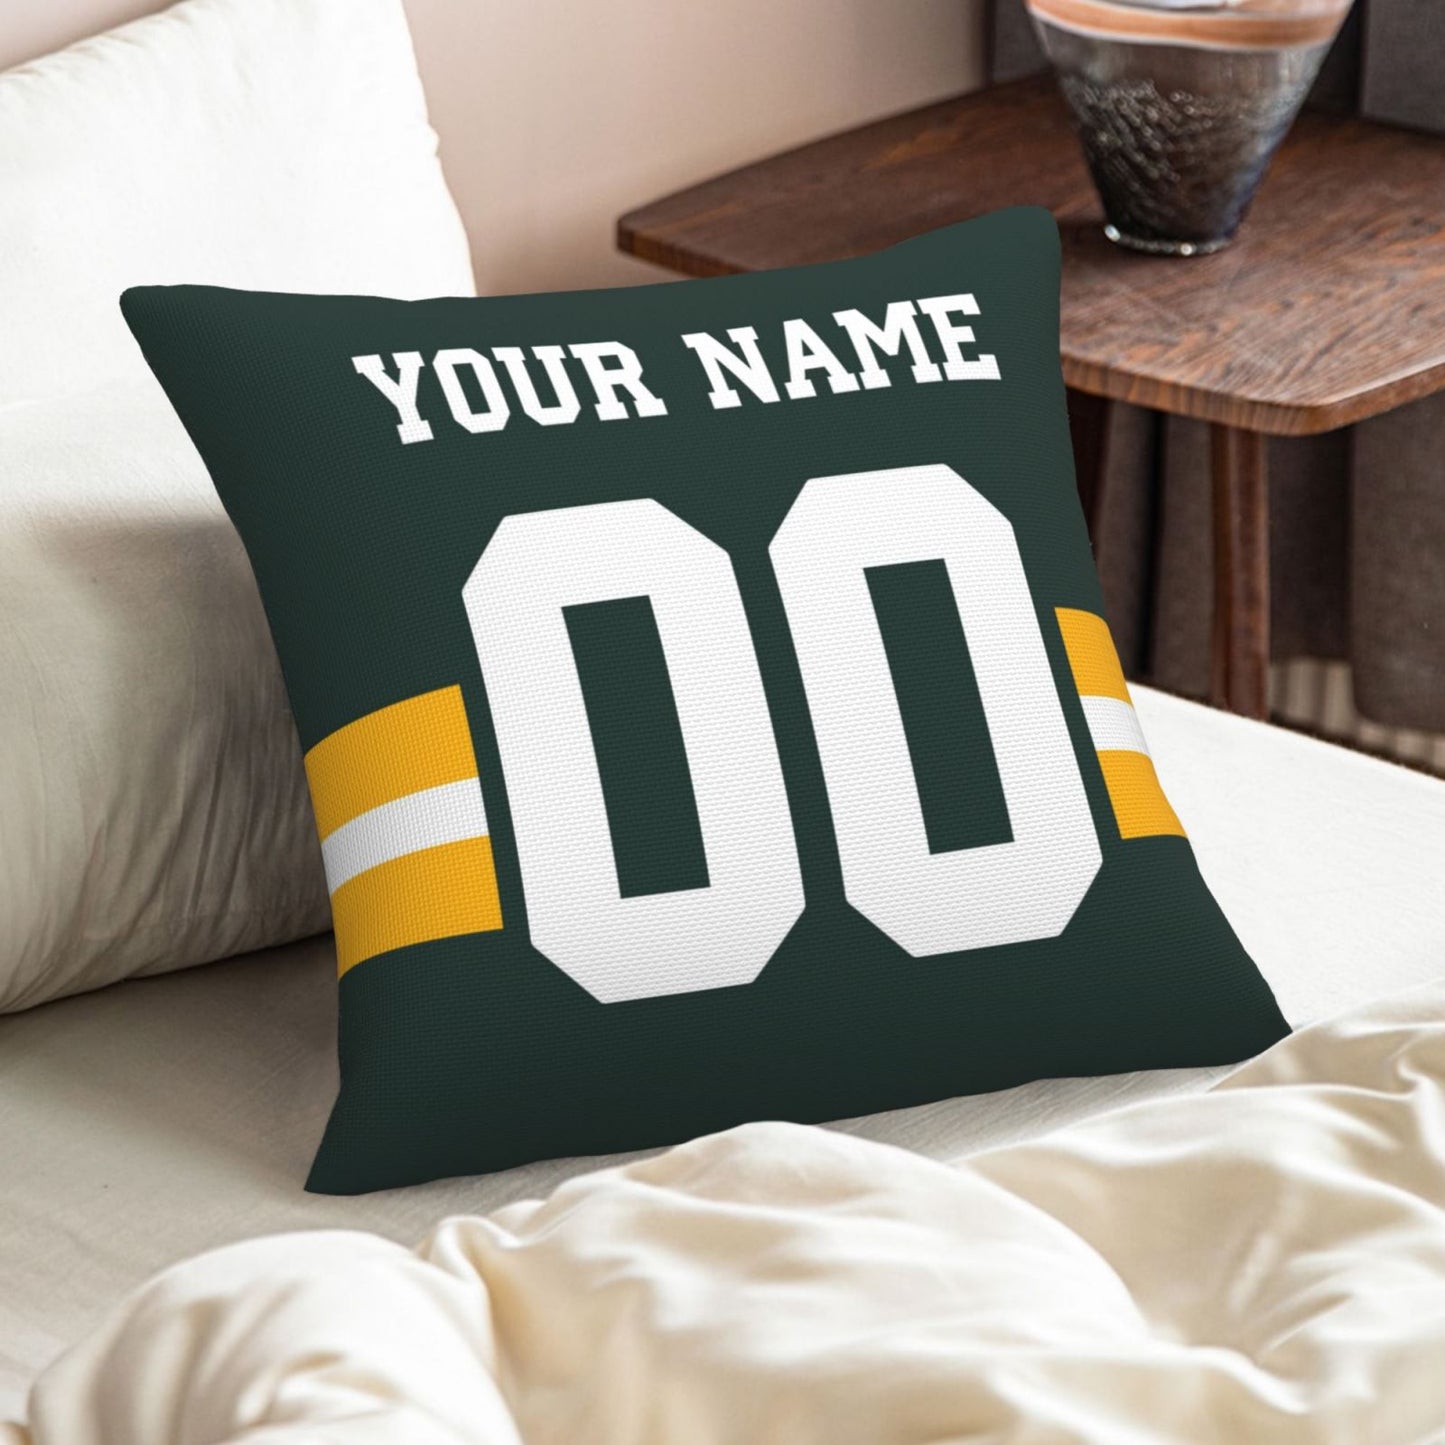 Customized Green Bay Packers Football Team Decorative Throw Pillow Case Print Personalized Football Style Fans Letters & Number Green Pillowcase Birthday Gift